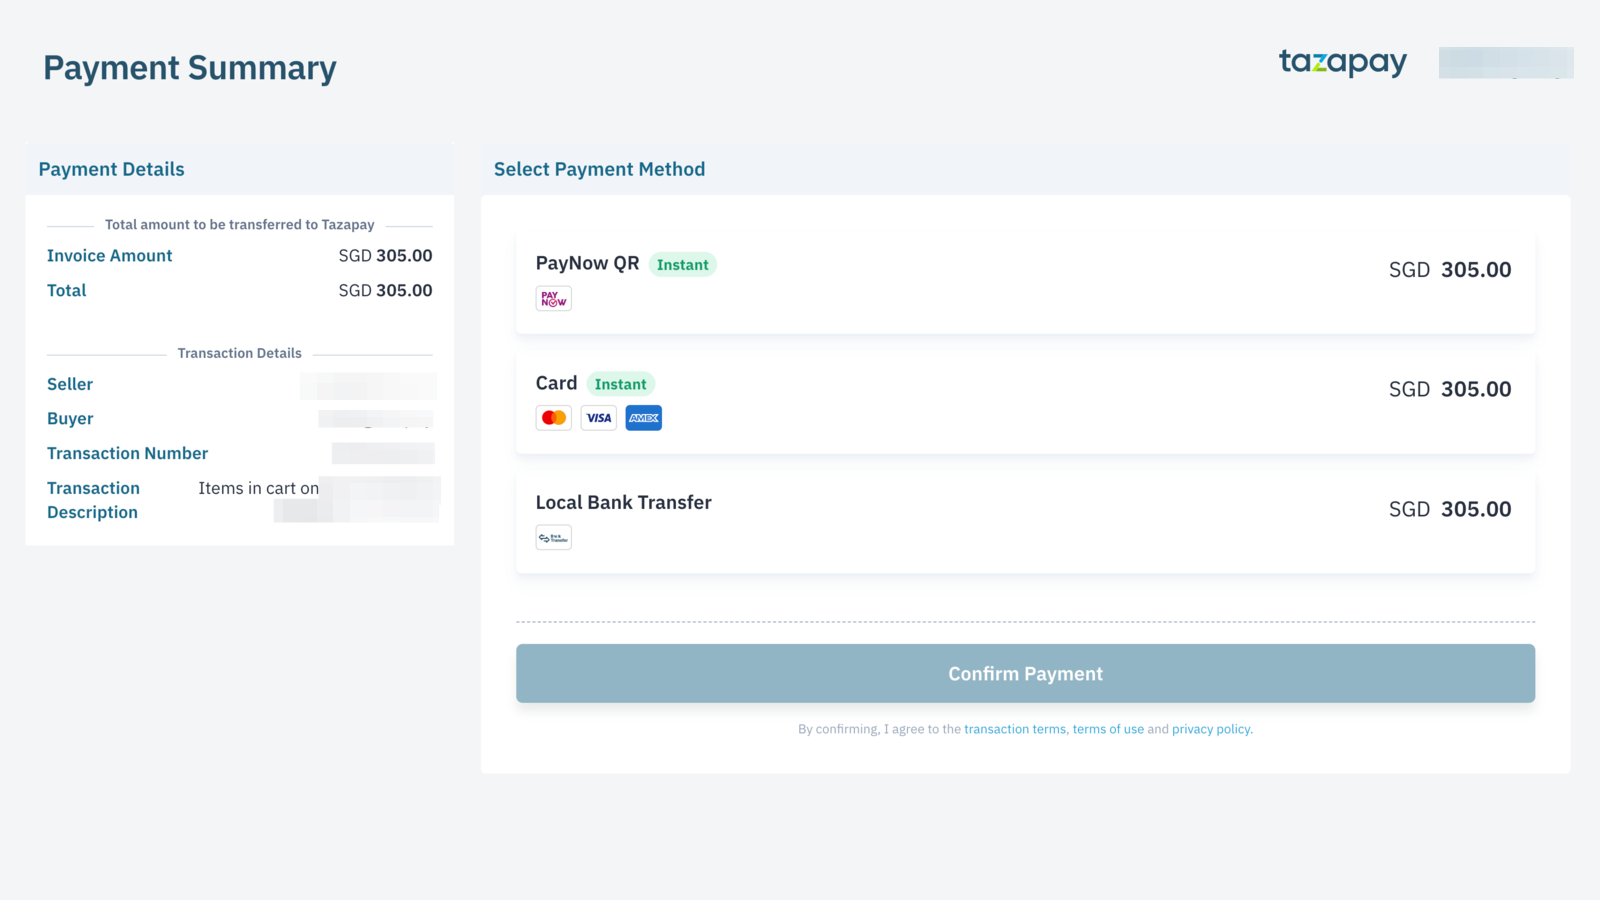 Payment options shown to the buyer